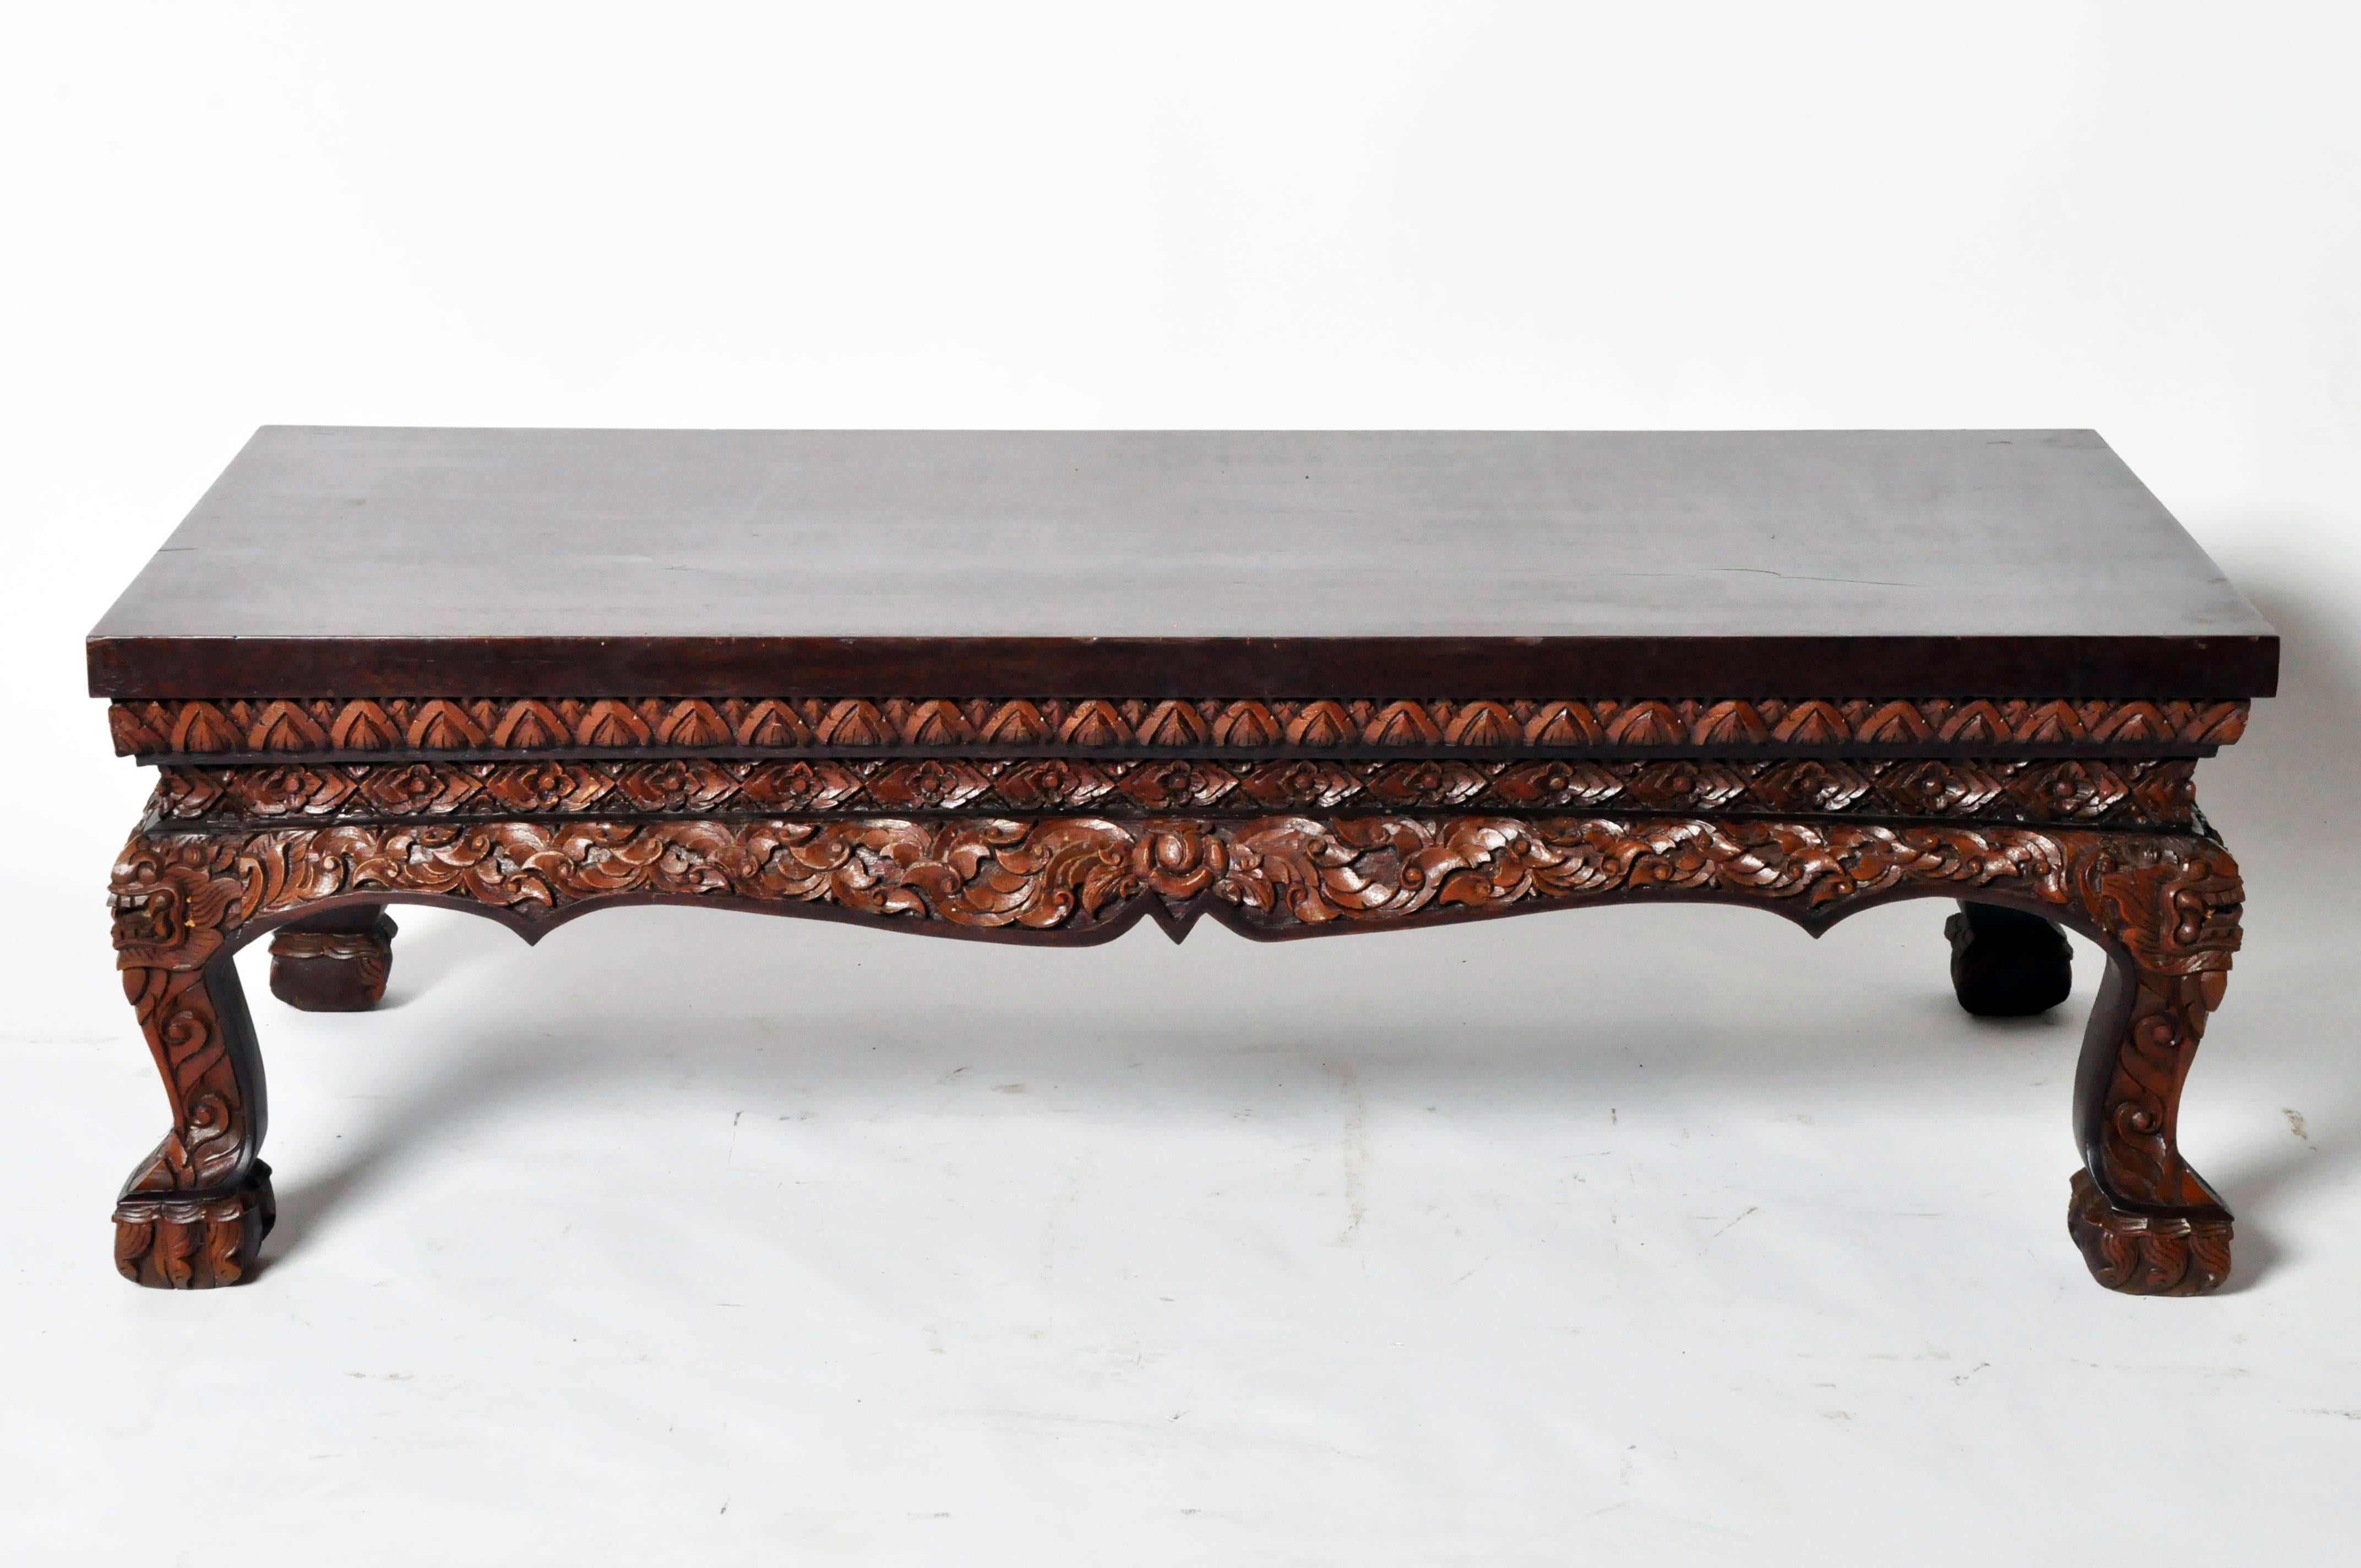 Just below the rectangular top, this coffee table has been hand-carved in a stunningly detailed floral motif that carries throughout the apron and down the squat cabriole legs.